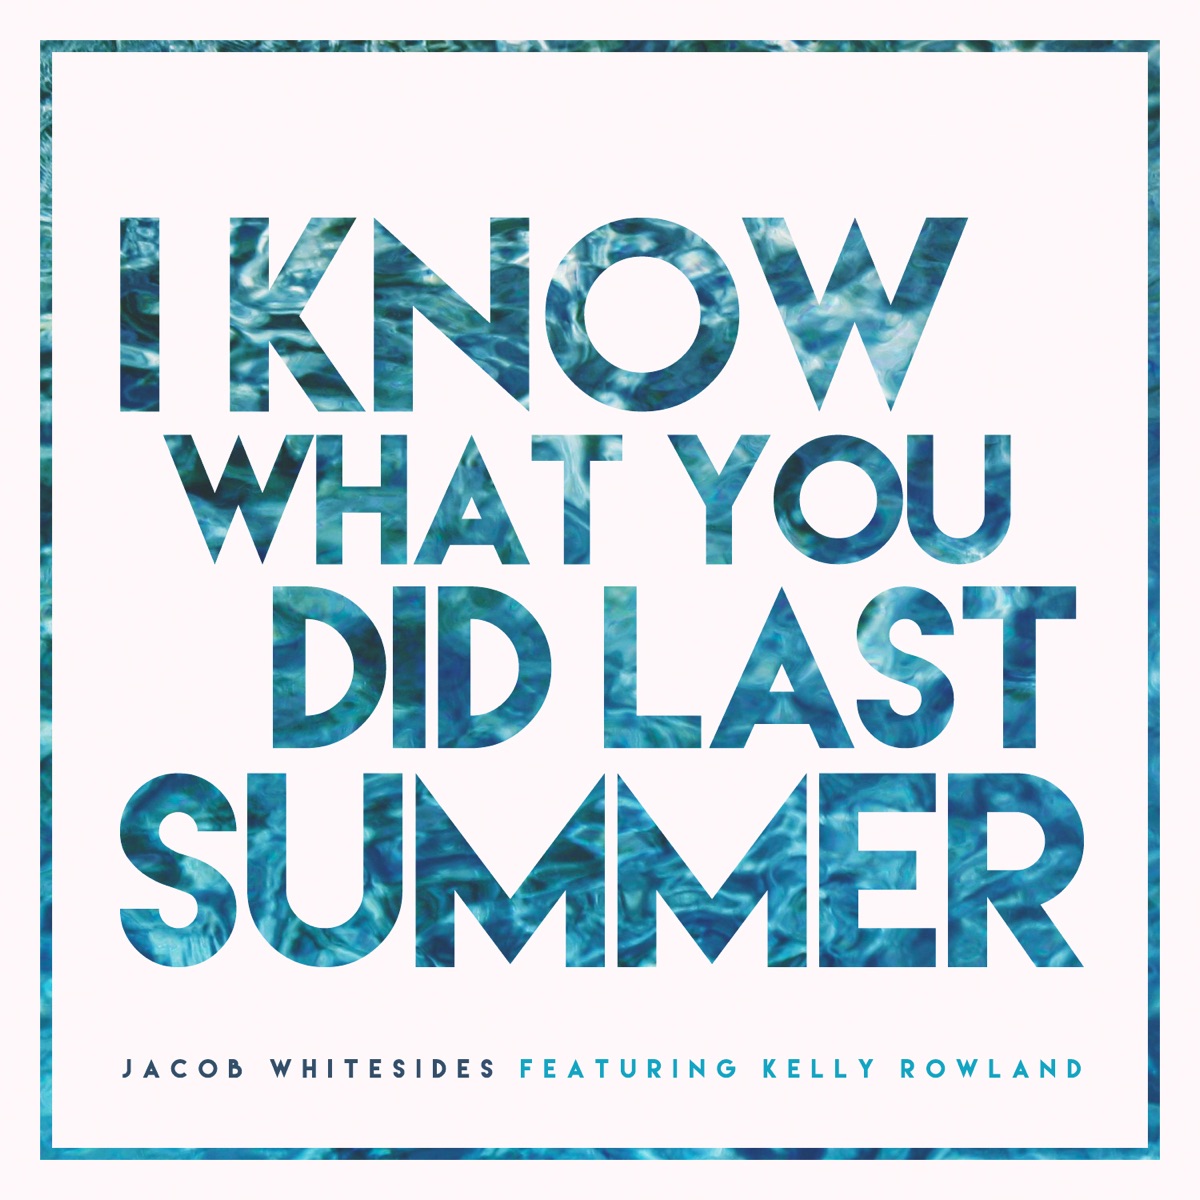 Jacob Whitesides featuring Kelly Rowland — I Know What You Did Last Summer cover artwork